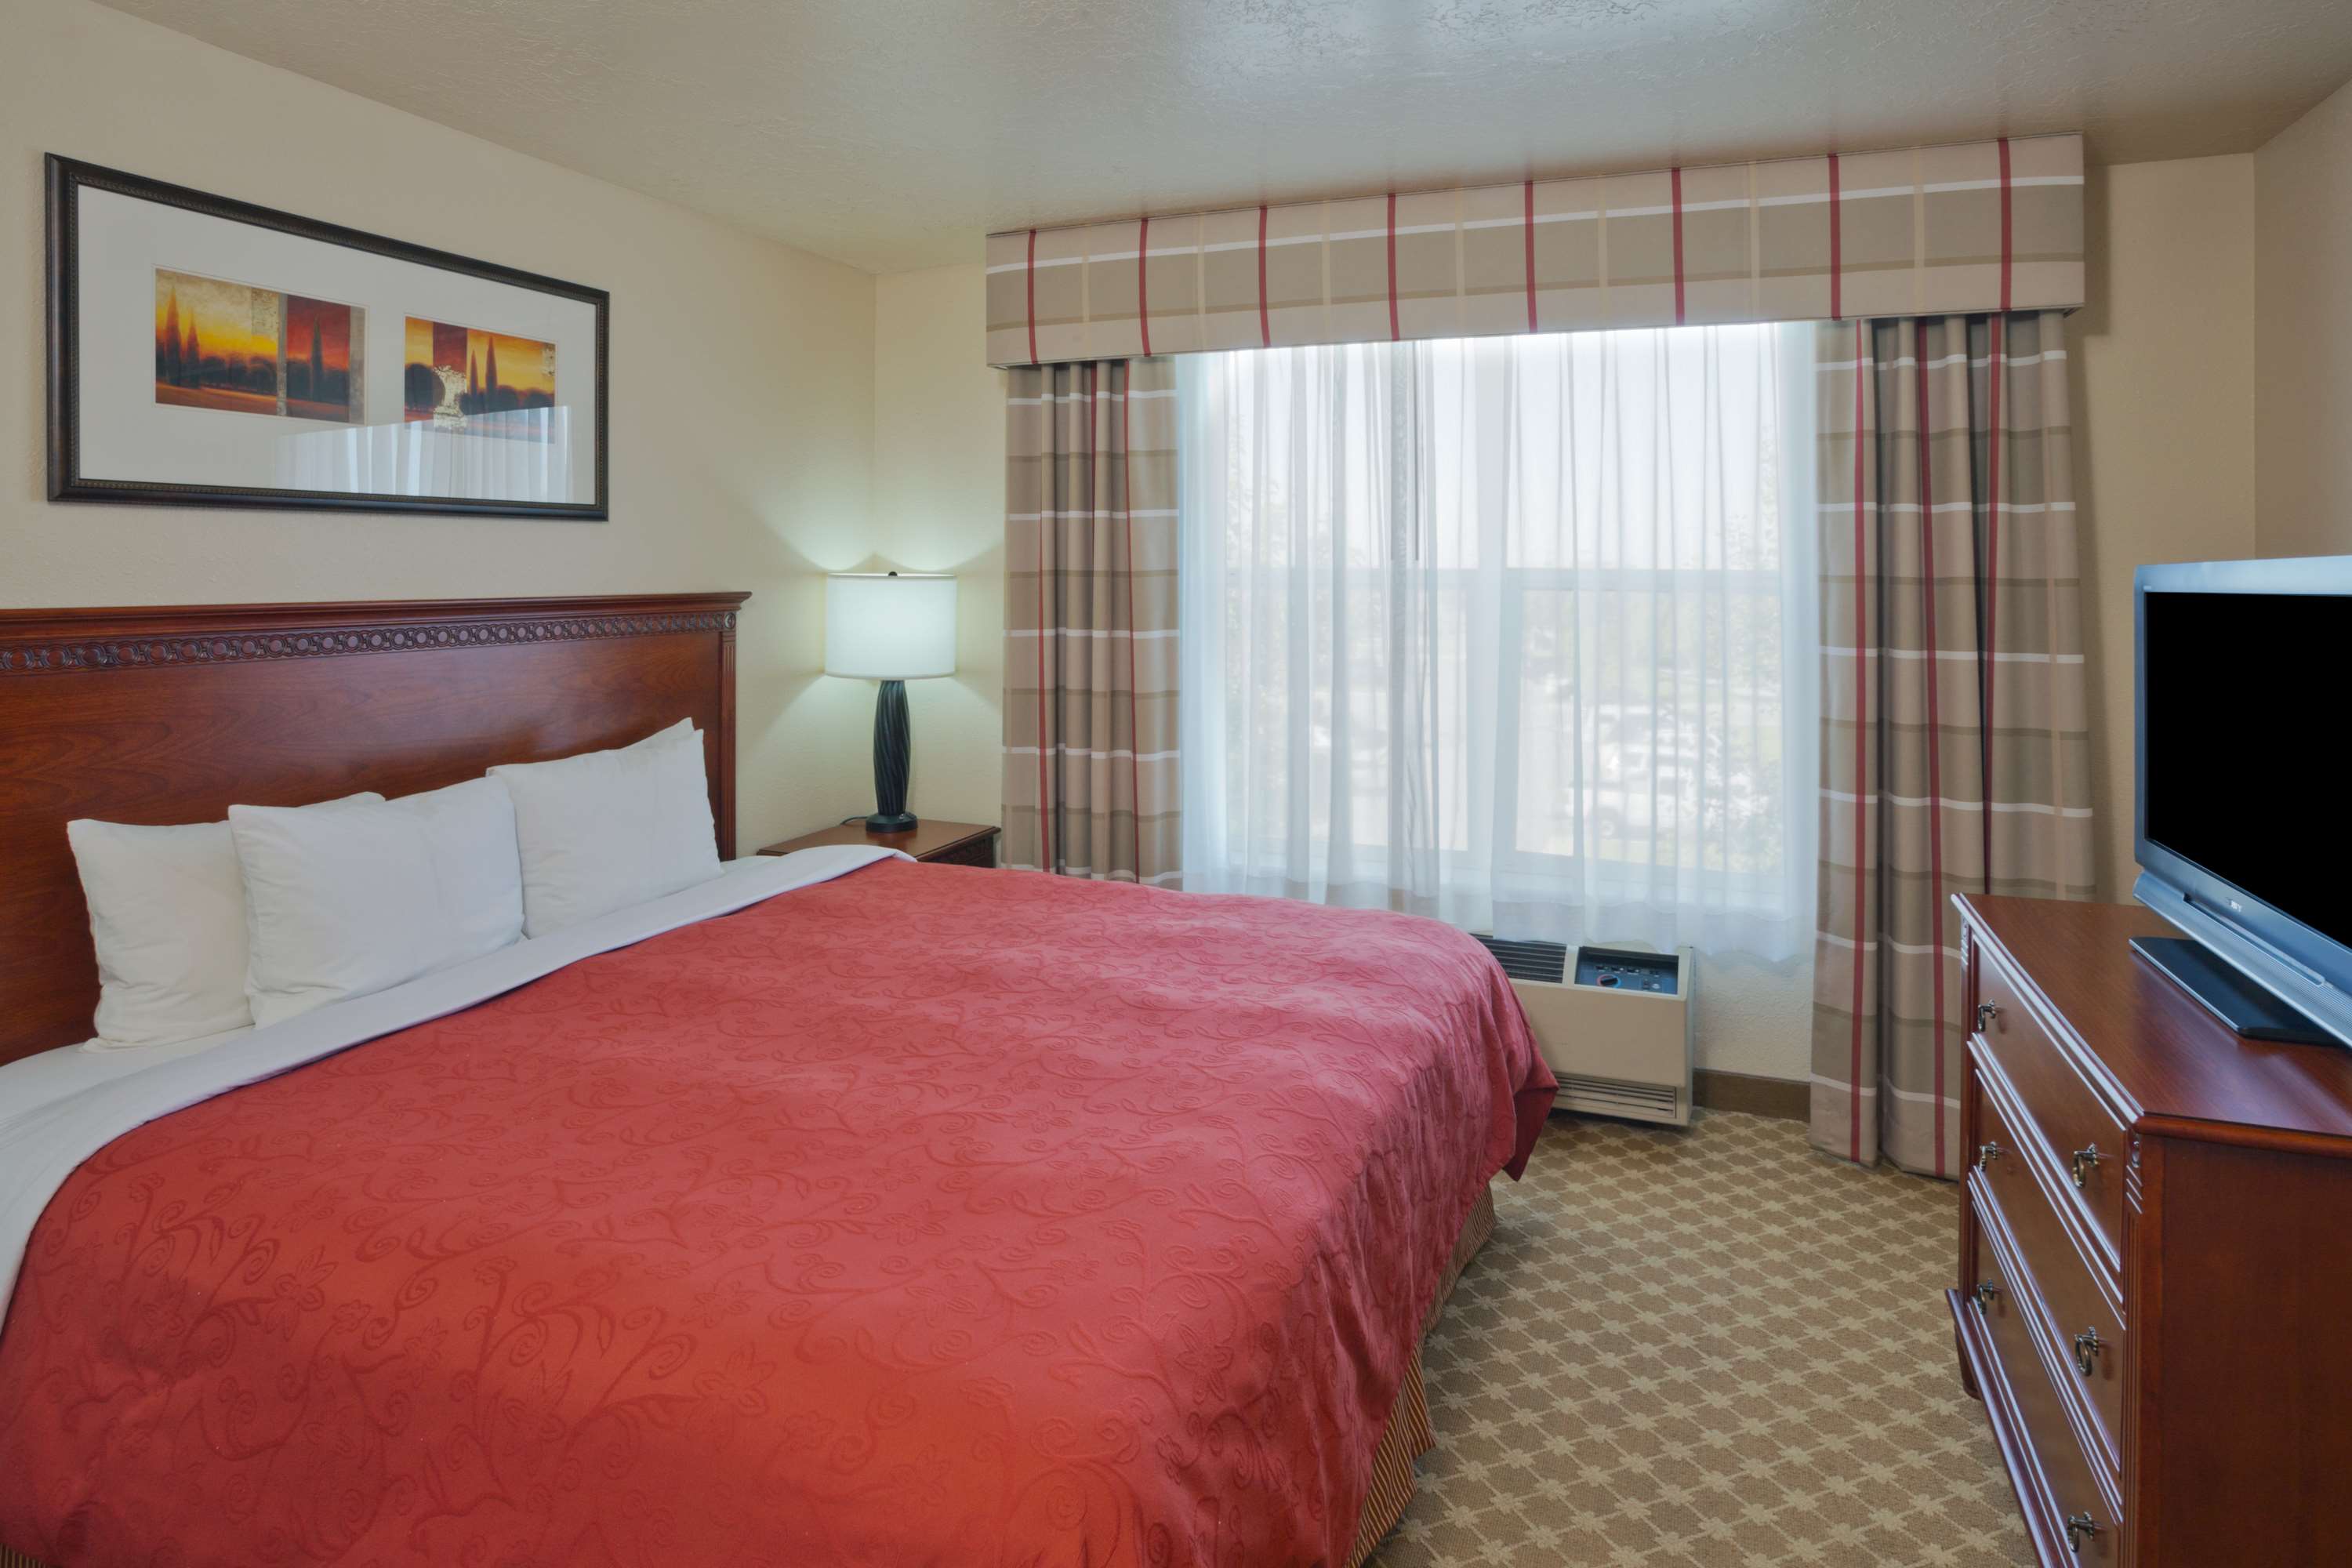 Country Inn & Suites by Radisson, West Valley City, UT Photo